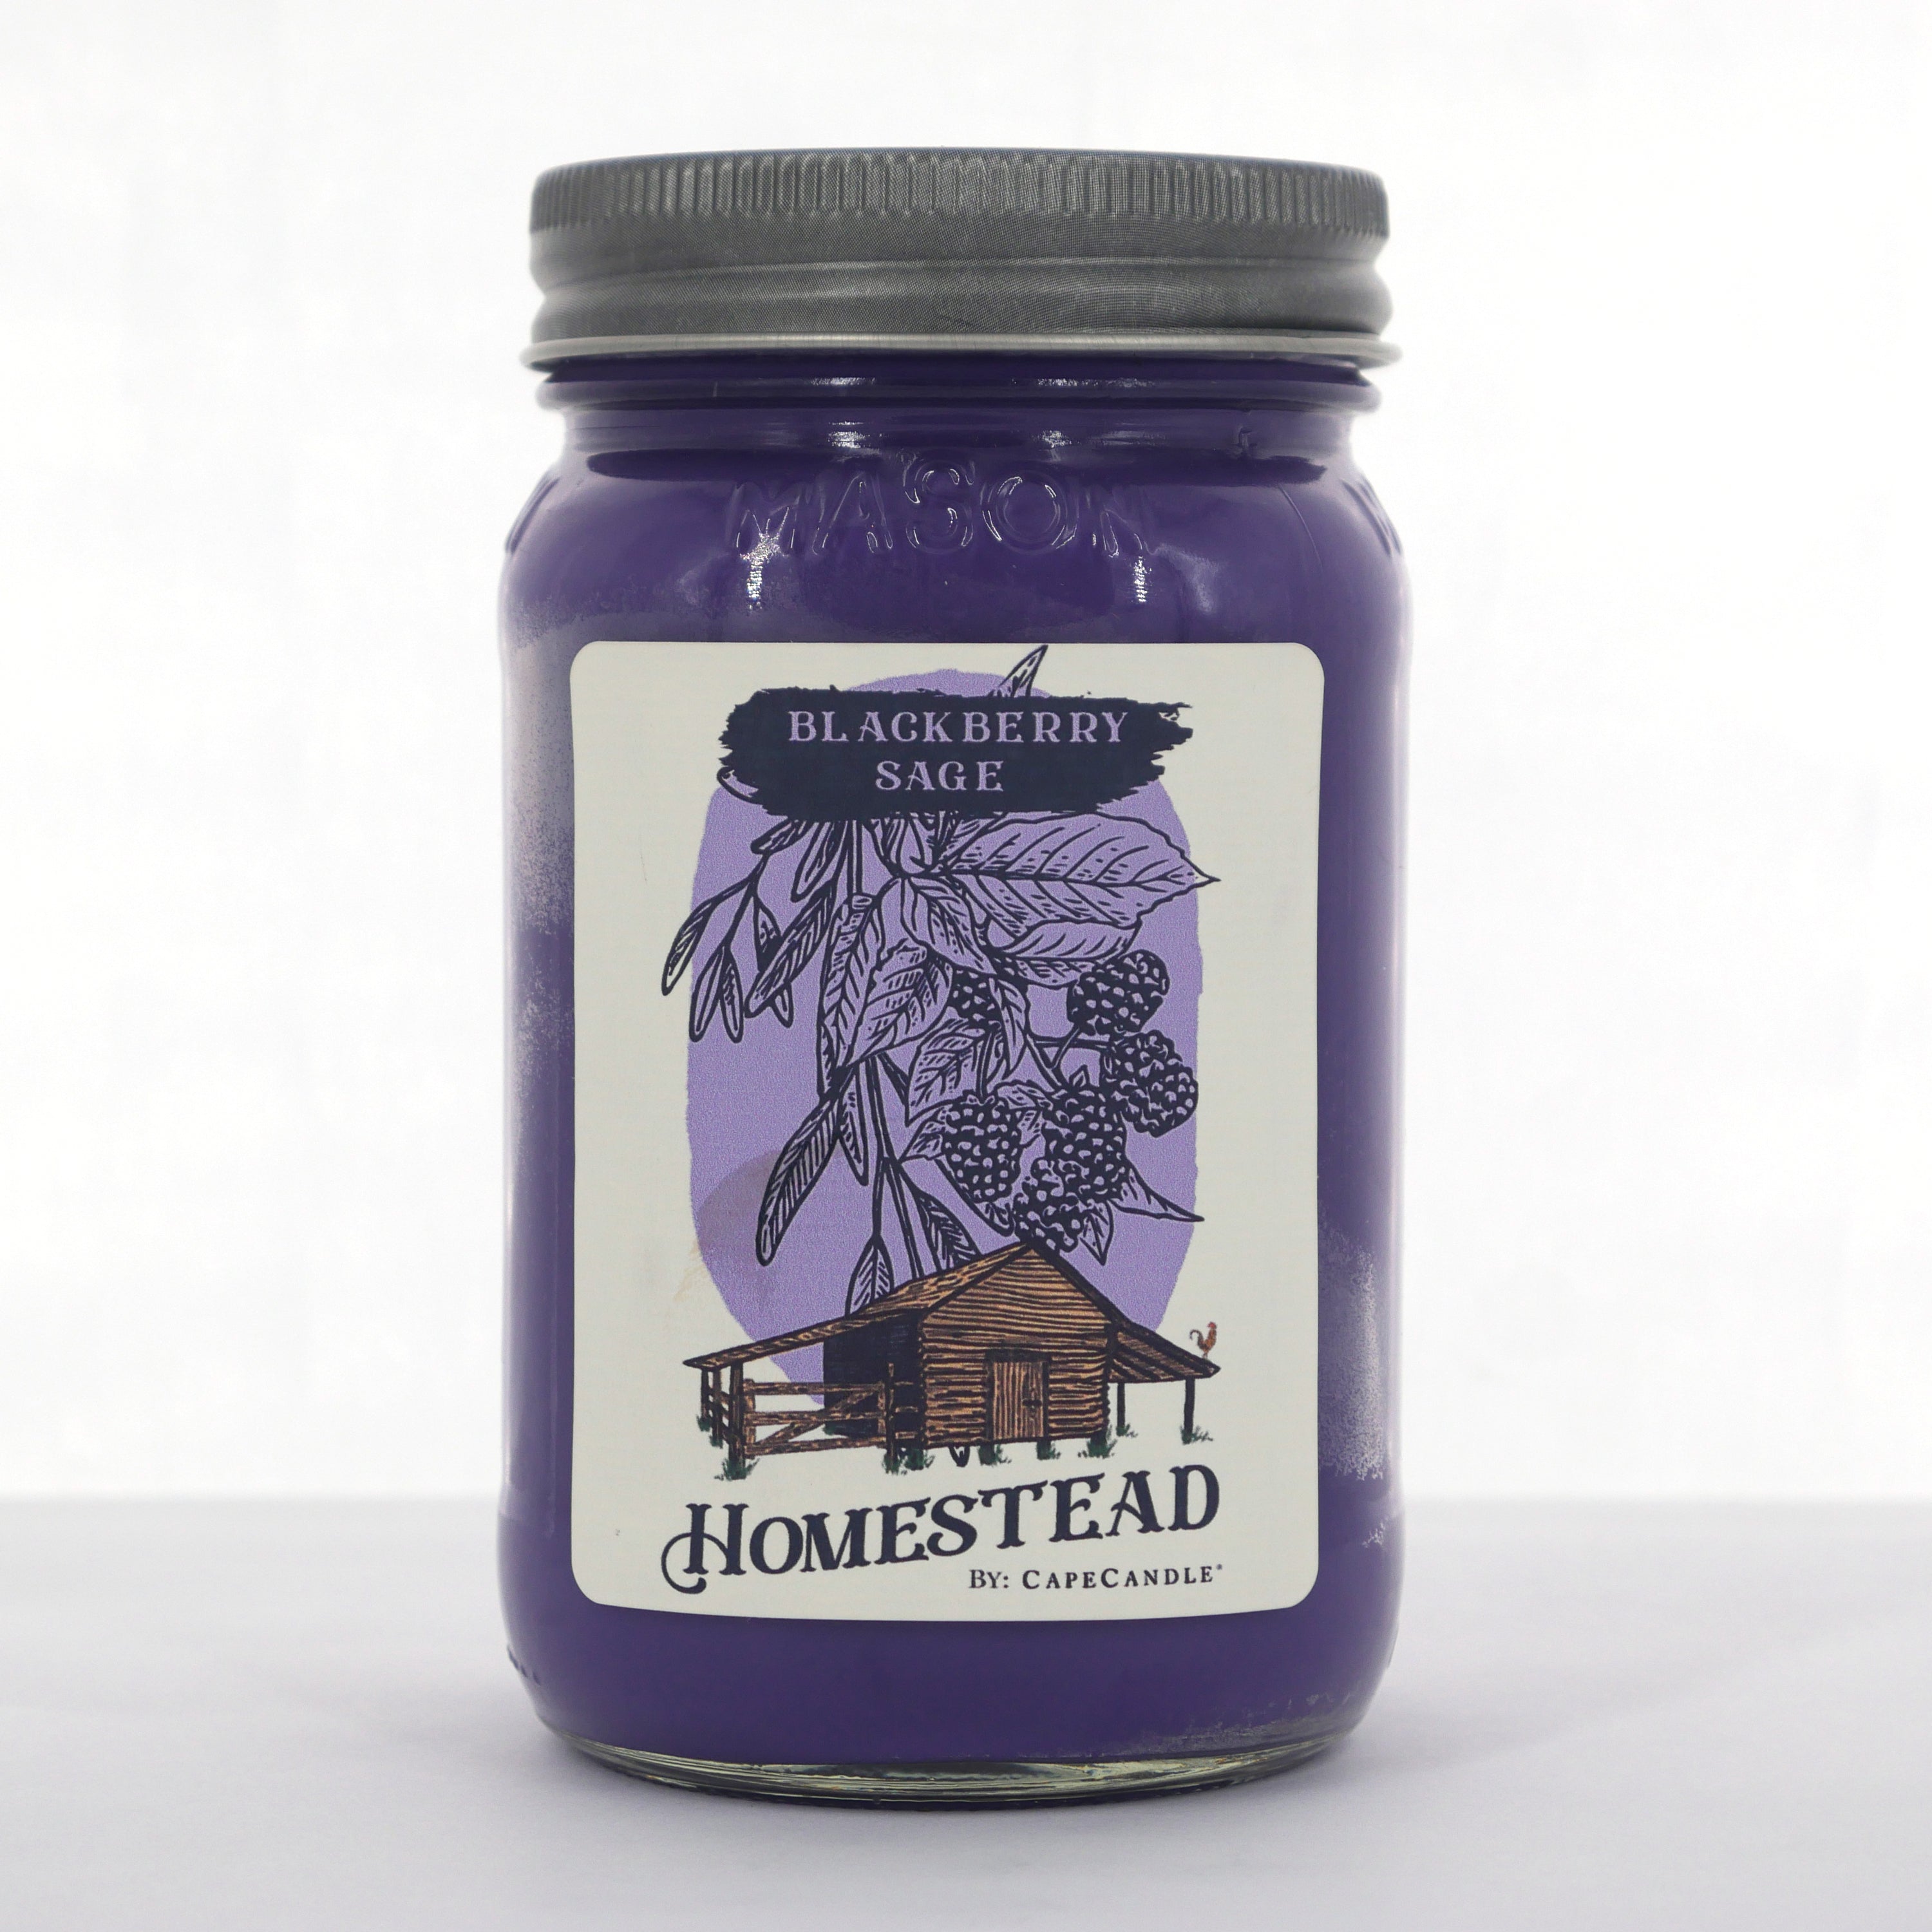 Blackberry Sage Soy Candle 16oz Homestead Mason Jar by Cape Candle